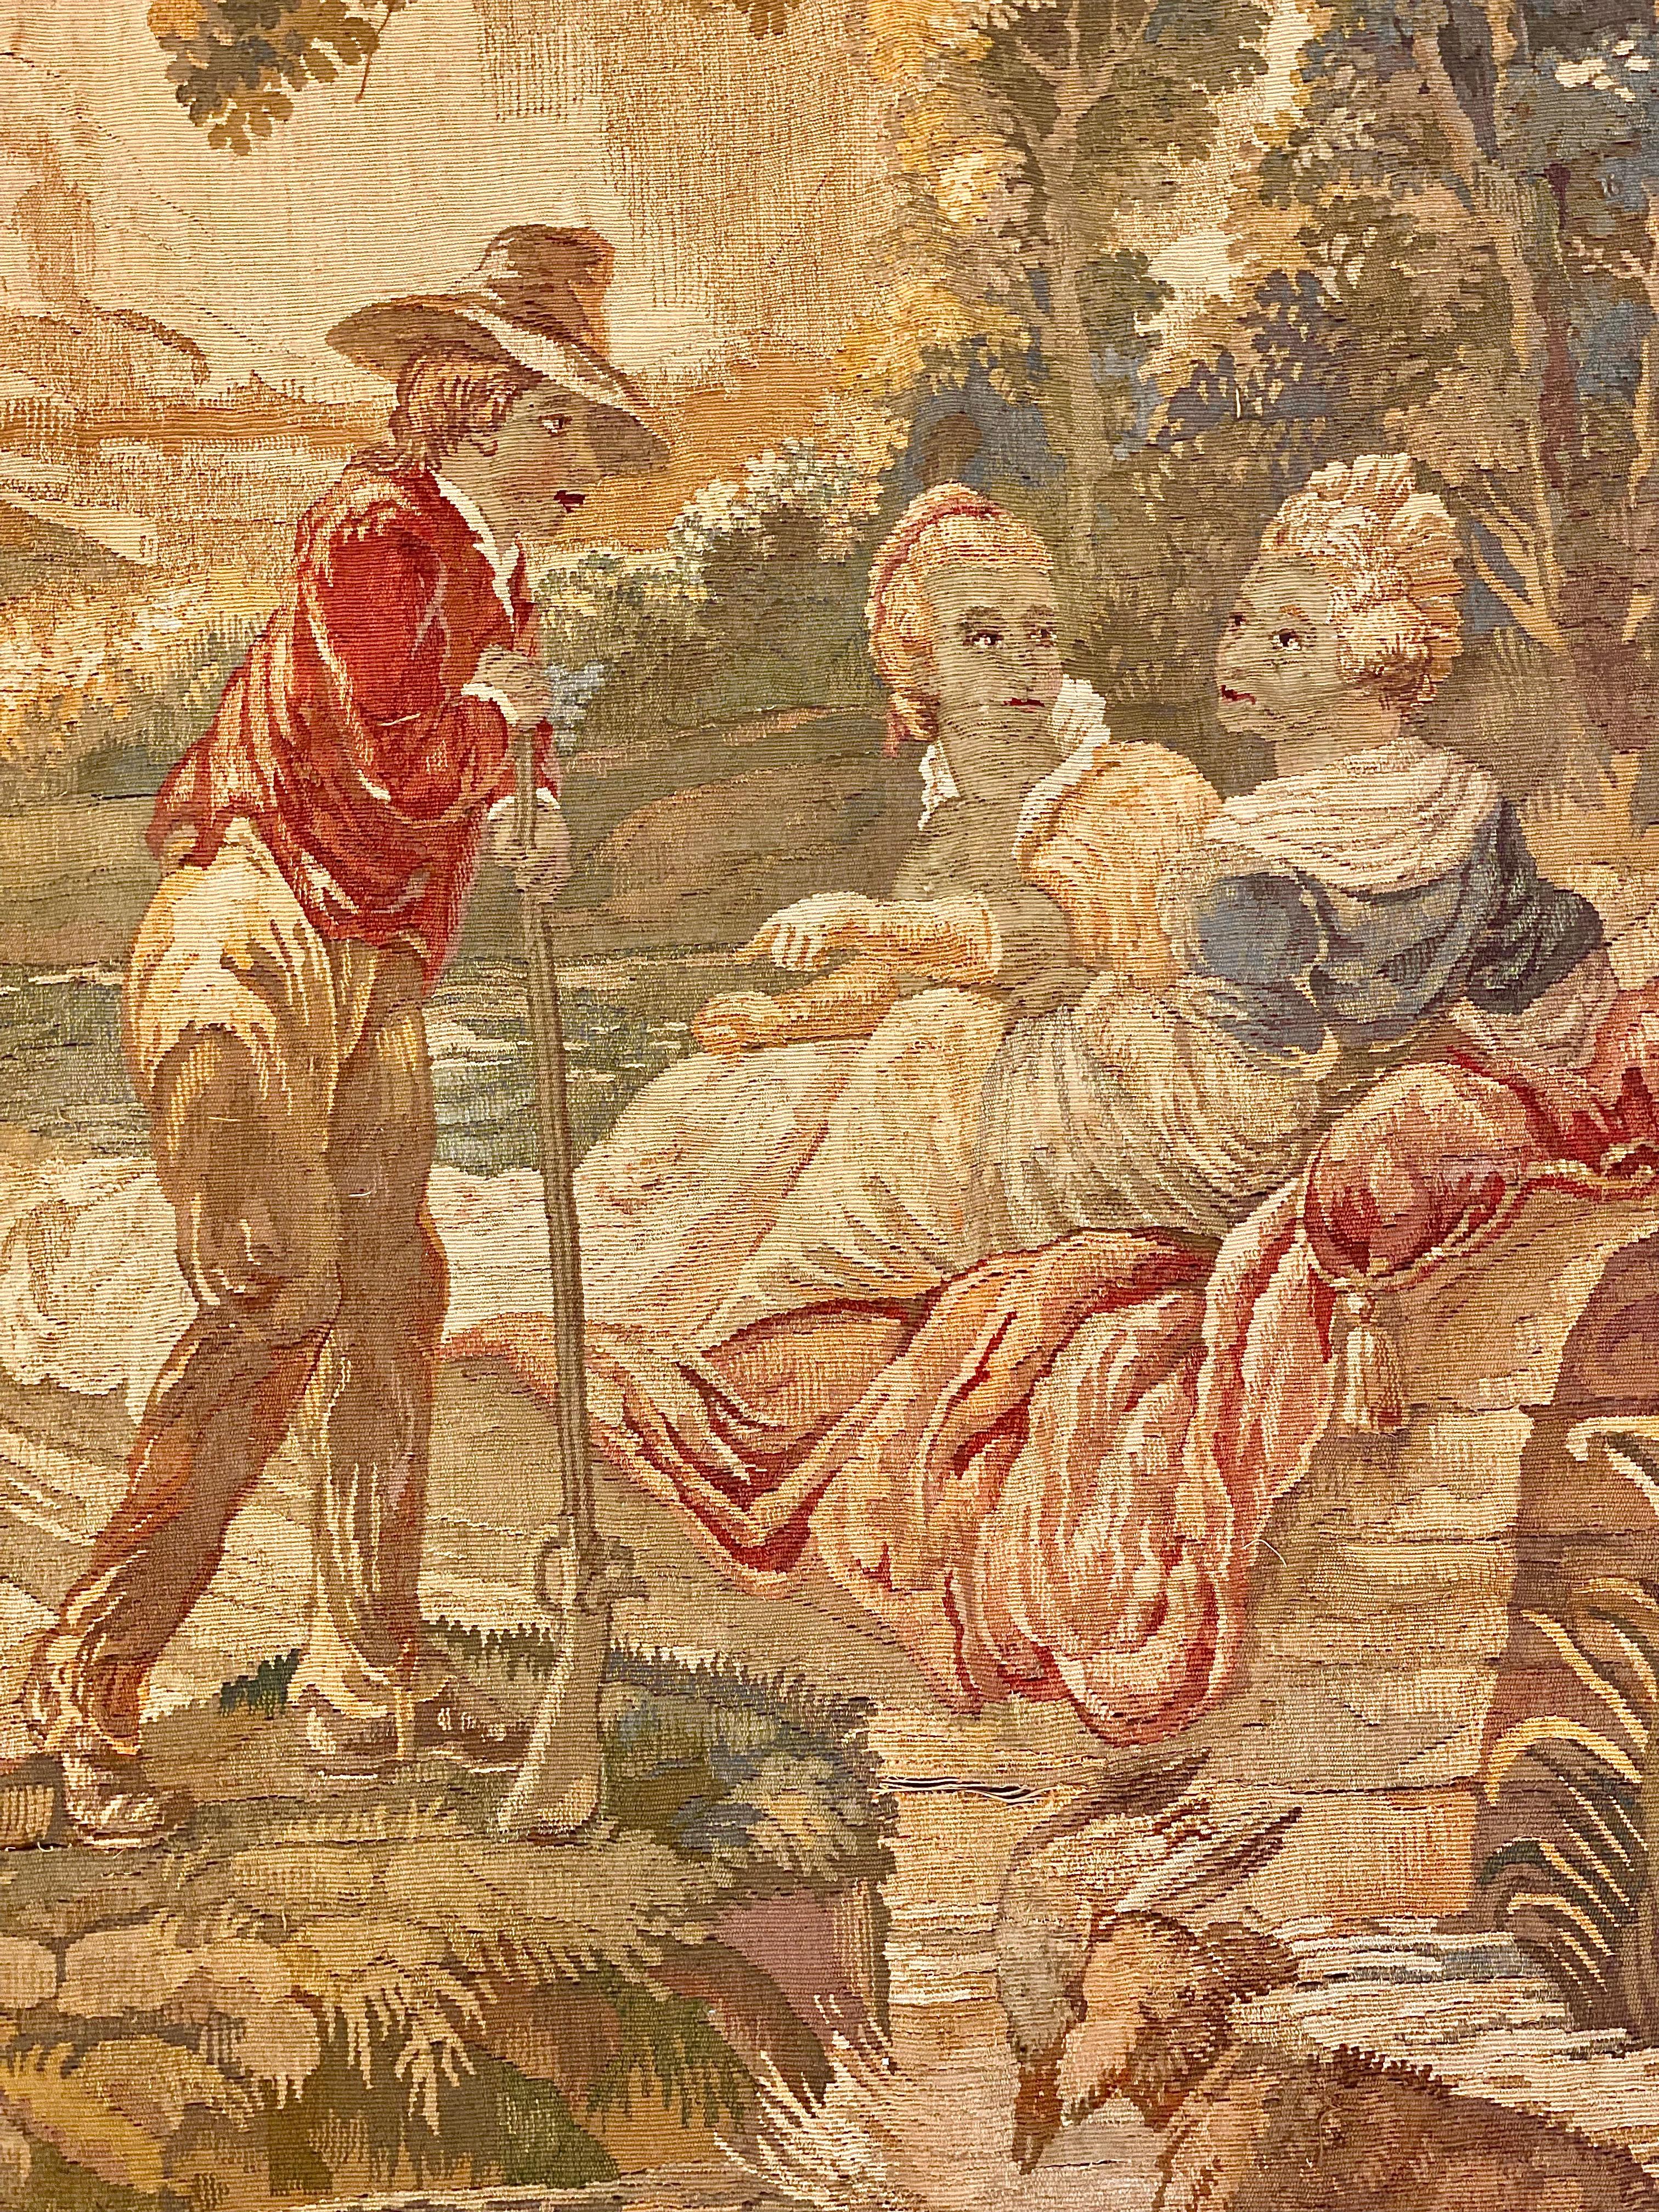 A fine and exuberant late 19th century Aubusson tapestry, depicting a gallant scene in a pastoral setting. Two maidens recline in a small boat on a river, against a background of trees and rocky outcrops in the distance. A young man pays his